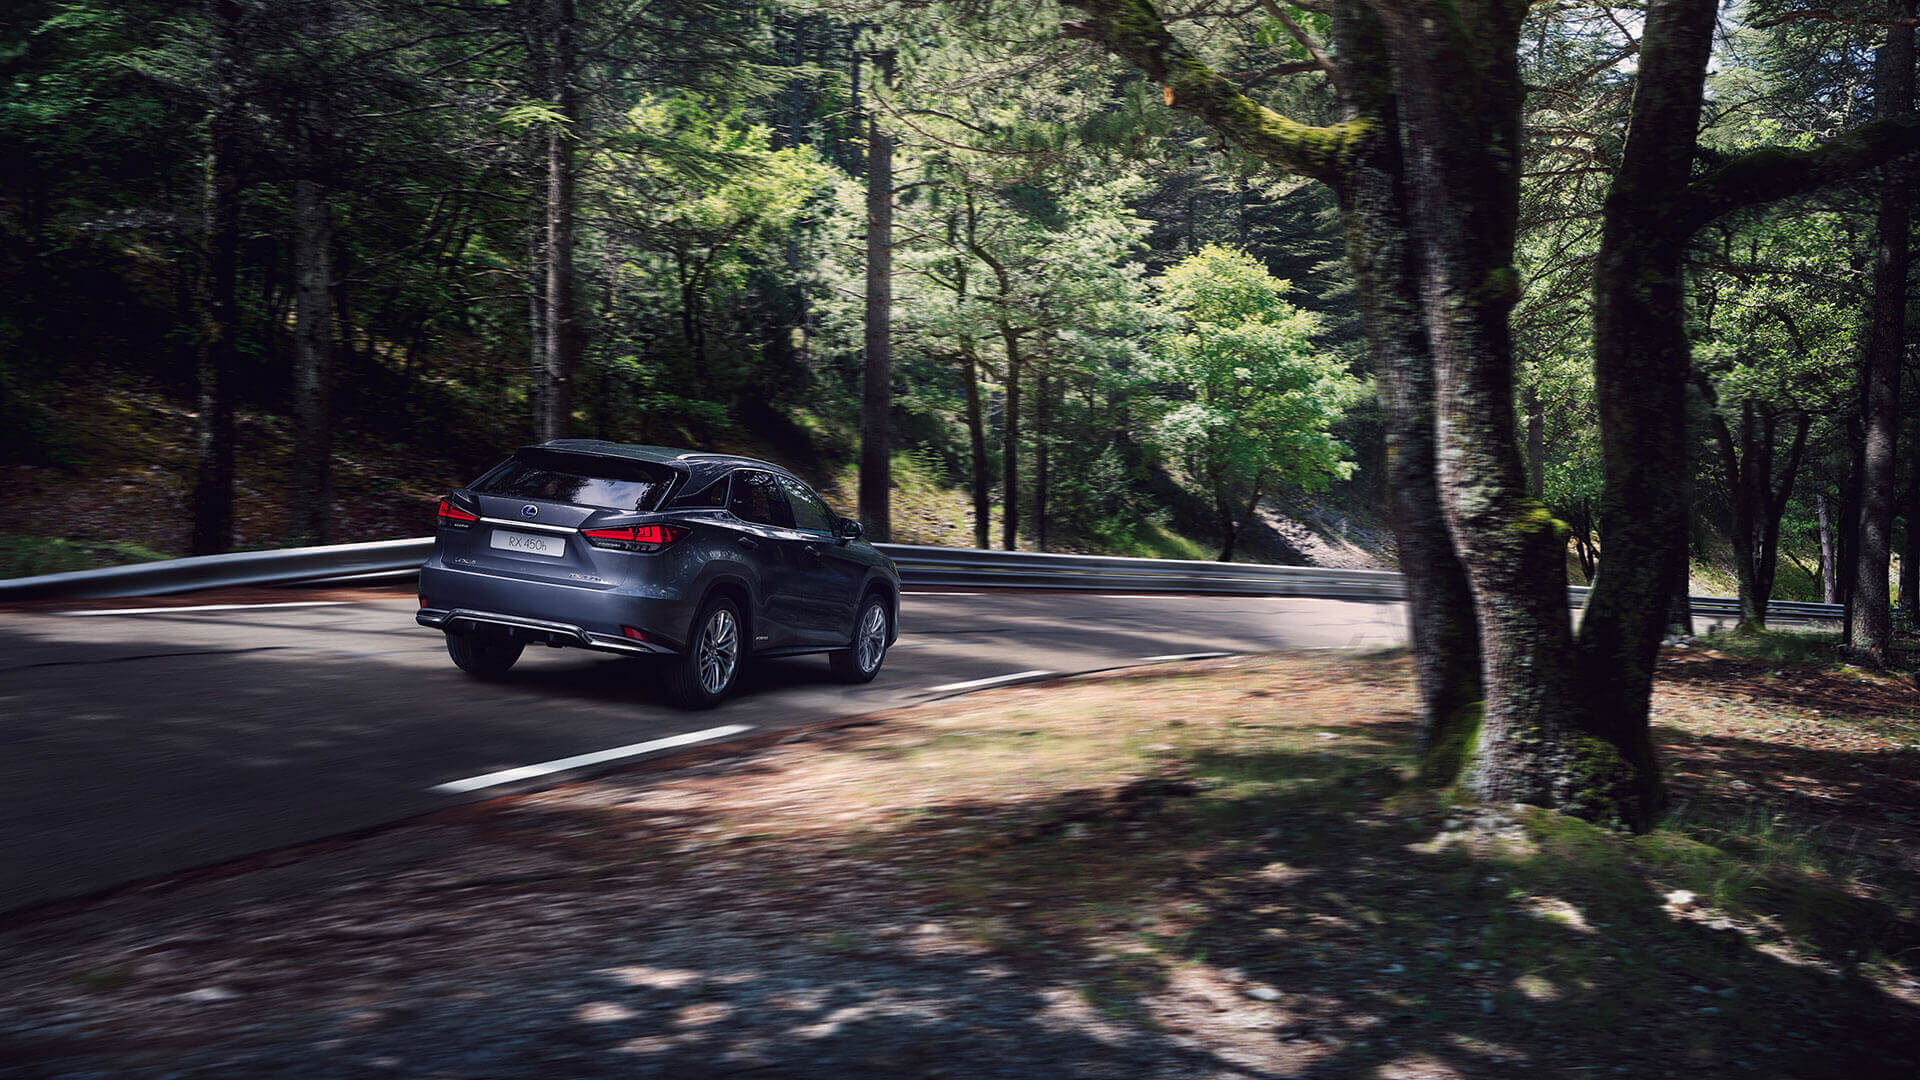 A Lexus RX 450h driving on a woodland road